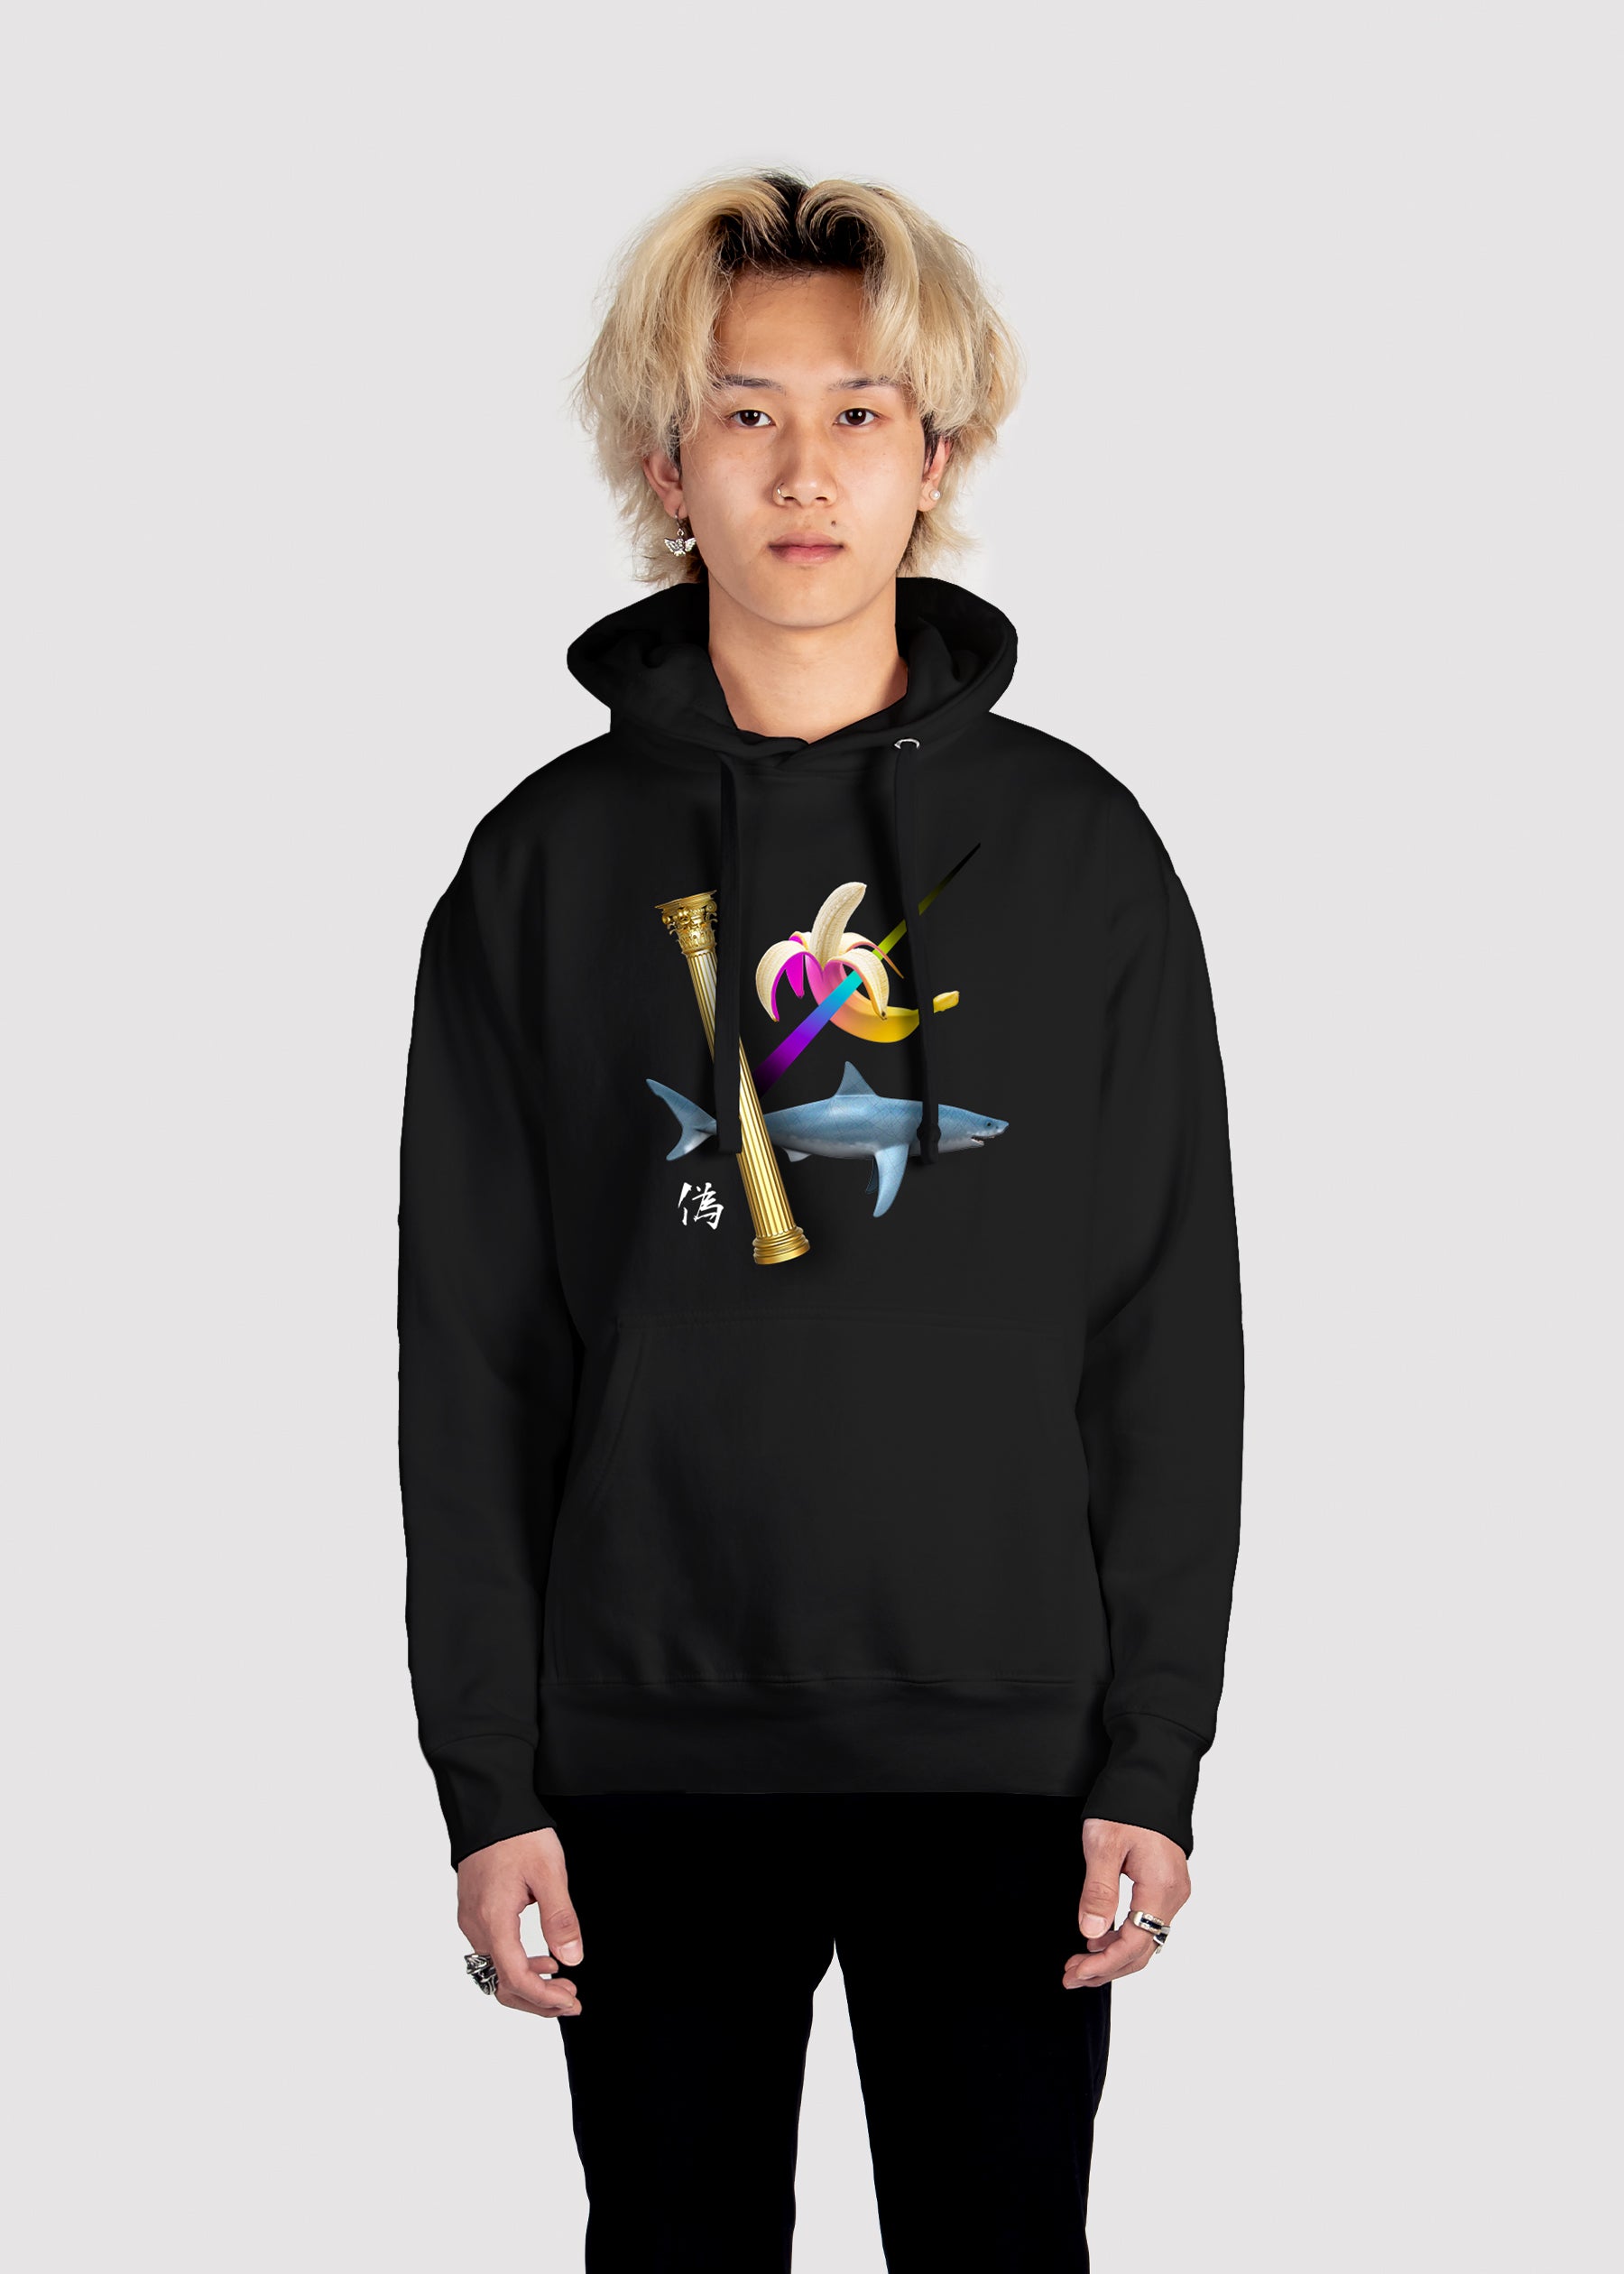 Abstraction Hoodie